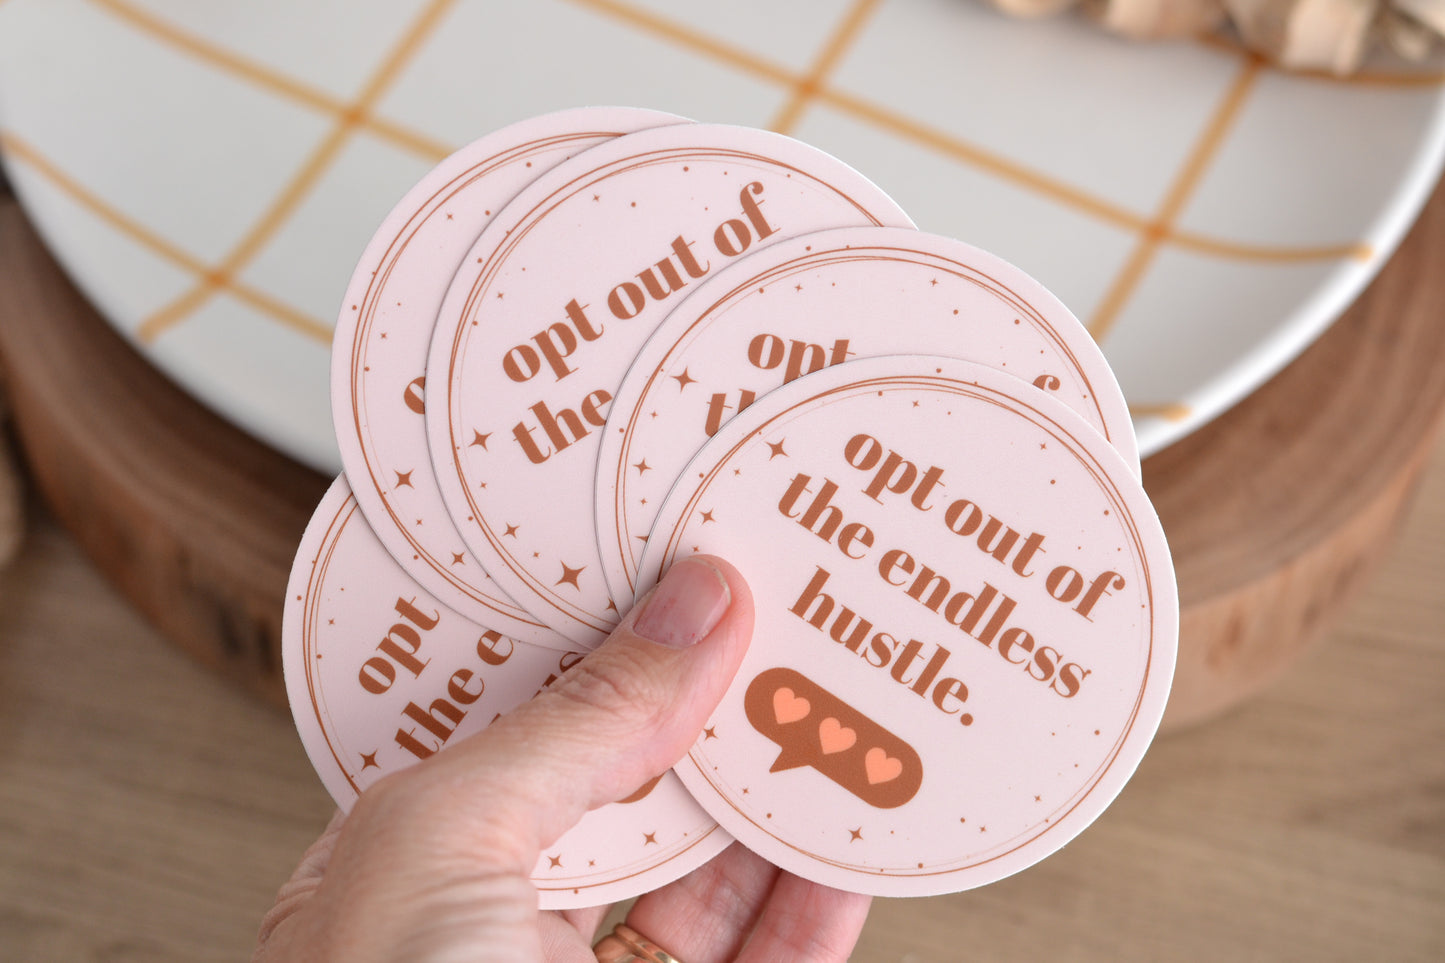 Opt out of the endless hustle sticker.